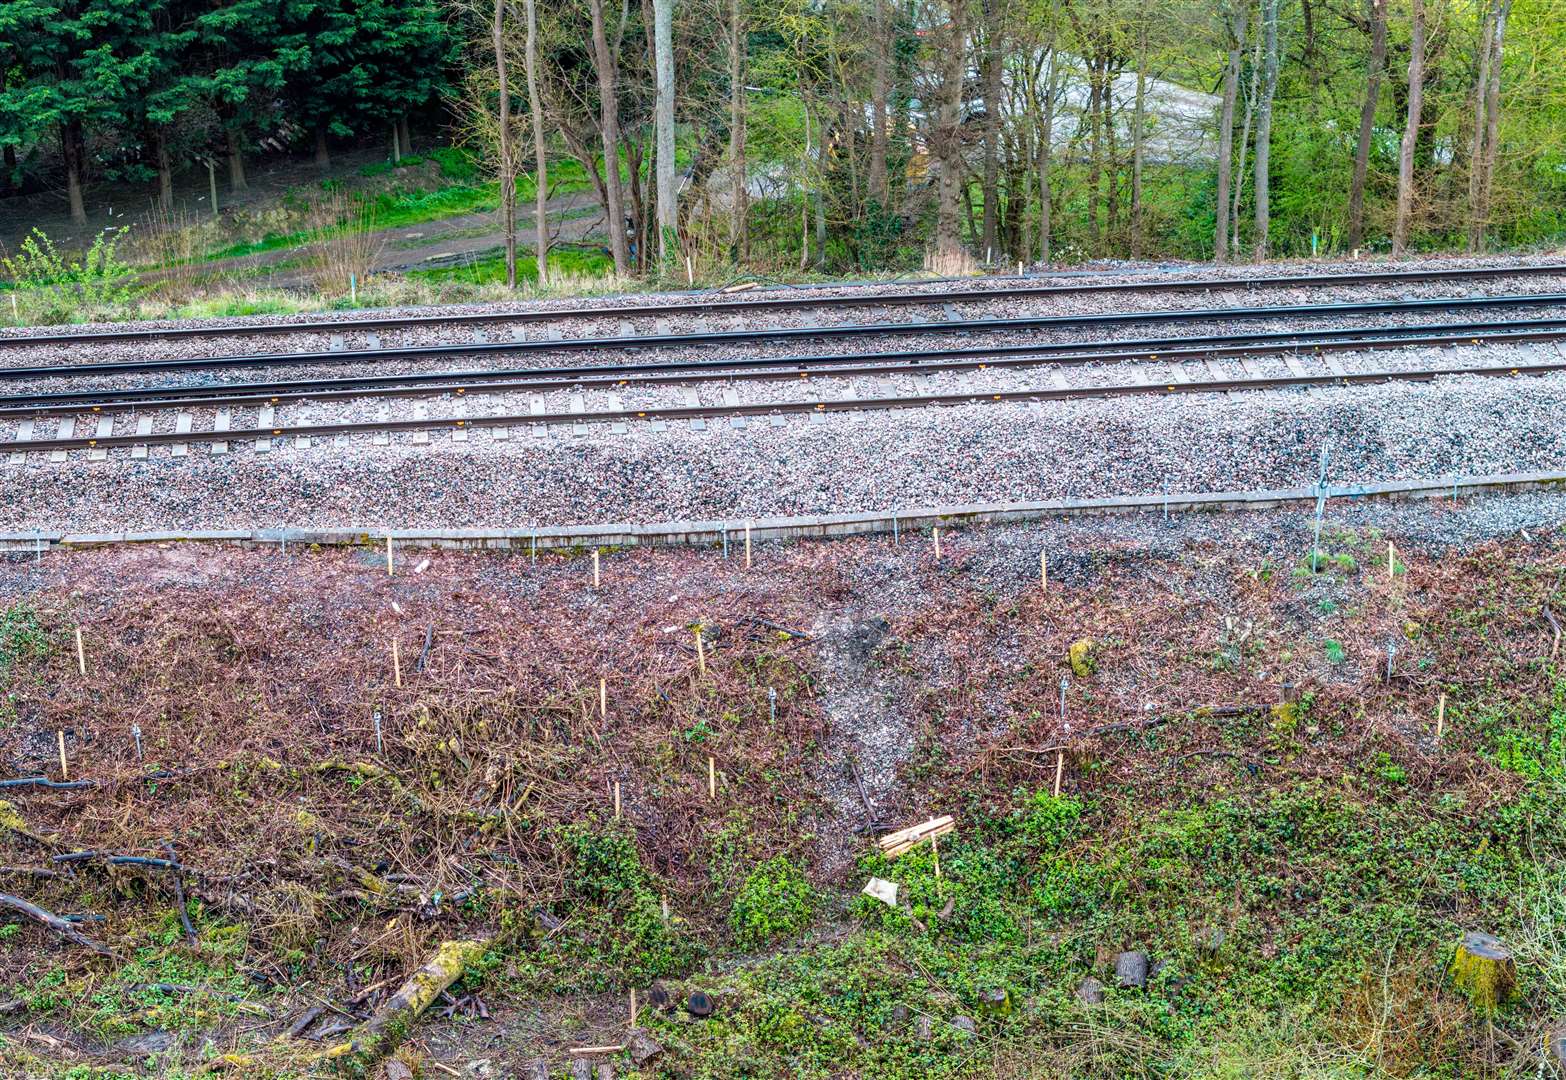 Drone footage shows problems with the embankment between Tonbridge and Redhill. Picture: Network Rail